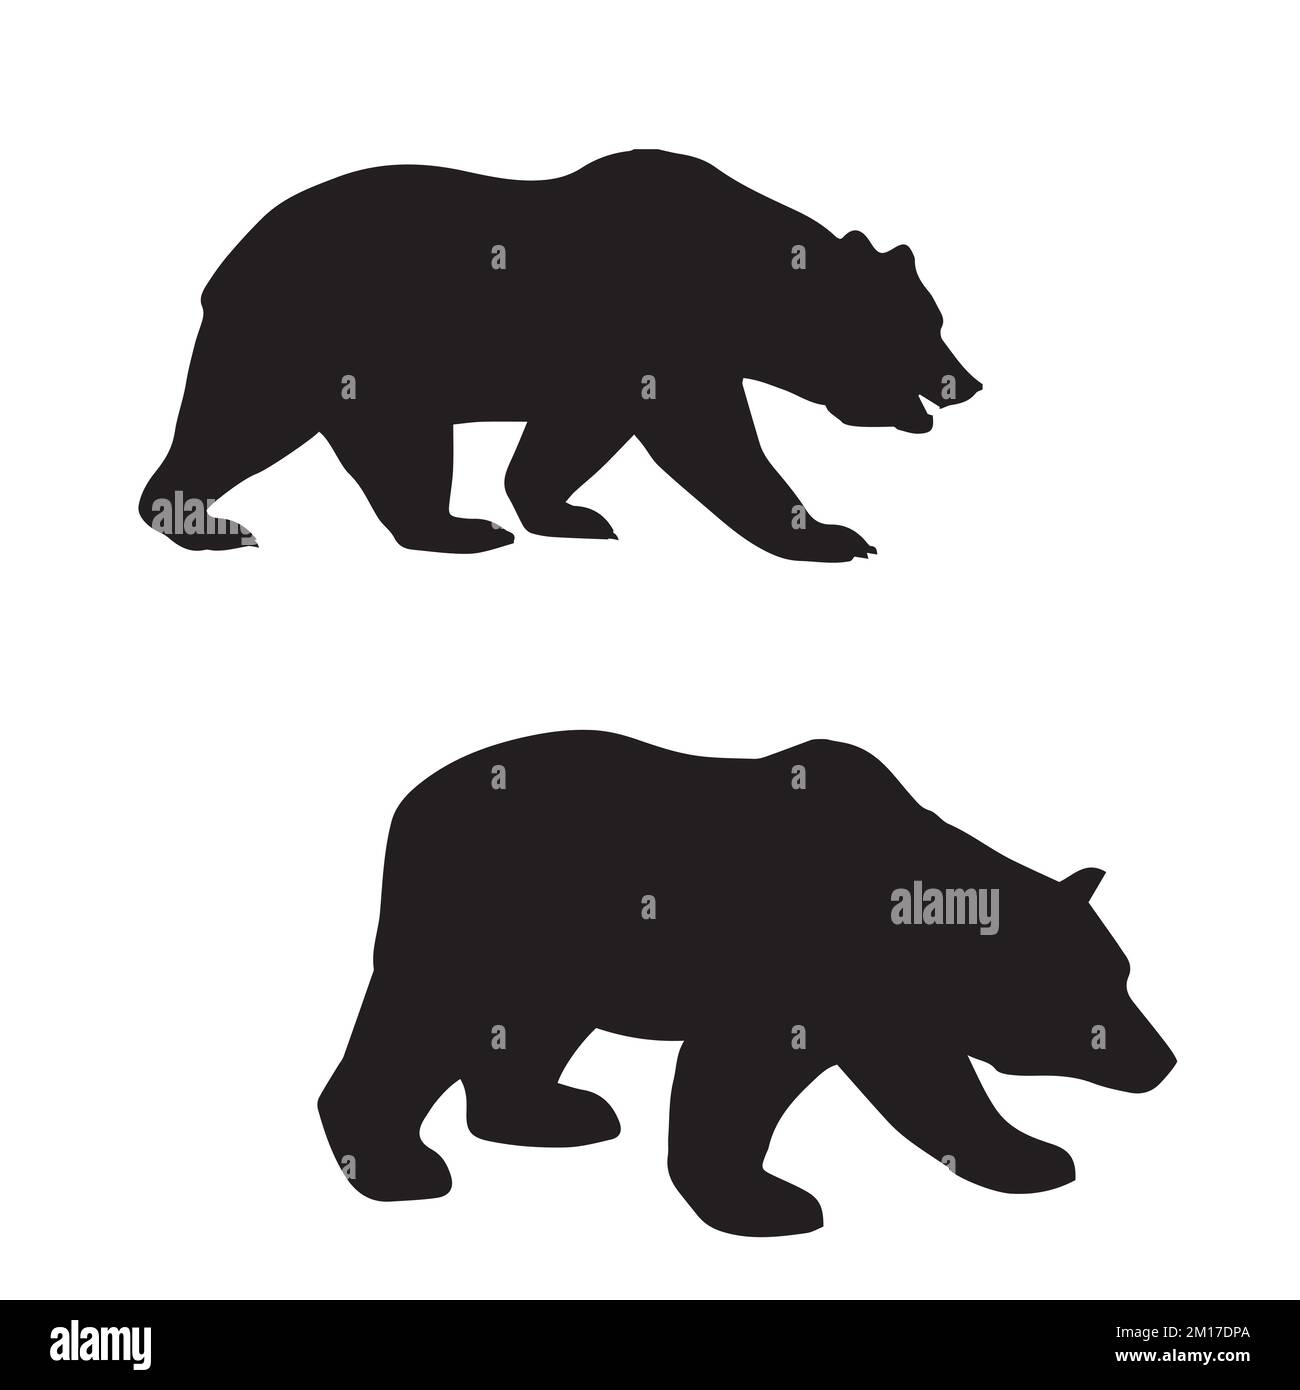 Vector Illustration of Grizzly Bear Silhouette Stock Vector